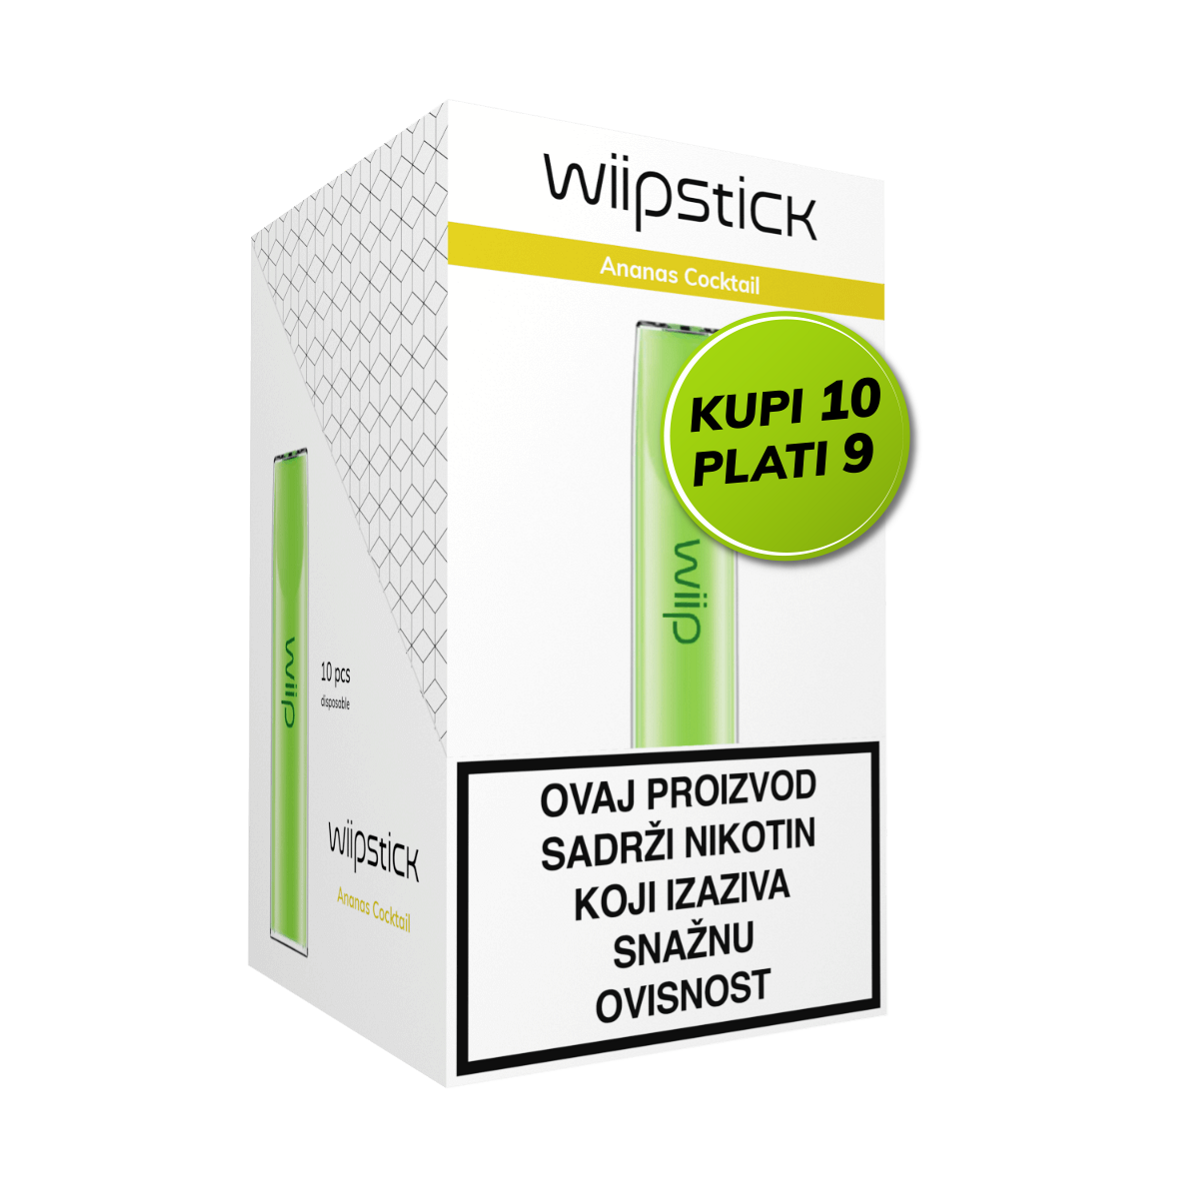 Wiipstick multipack 10/1, Ananas cocktail